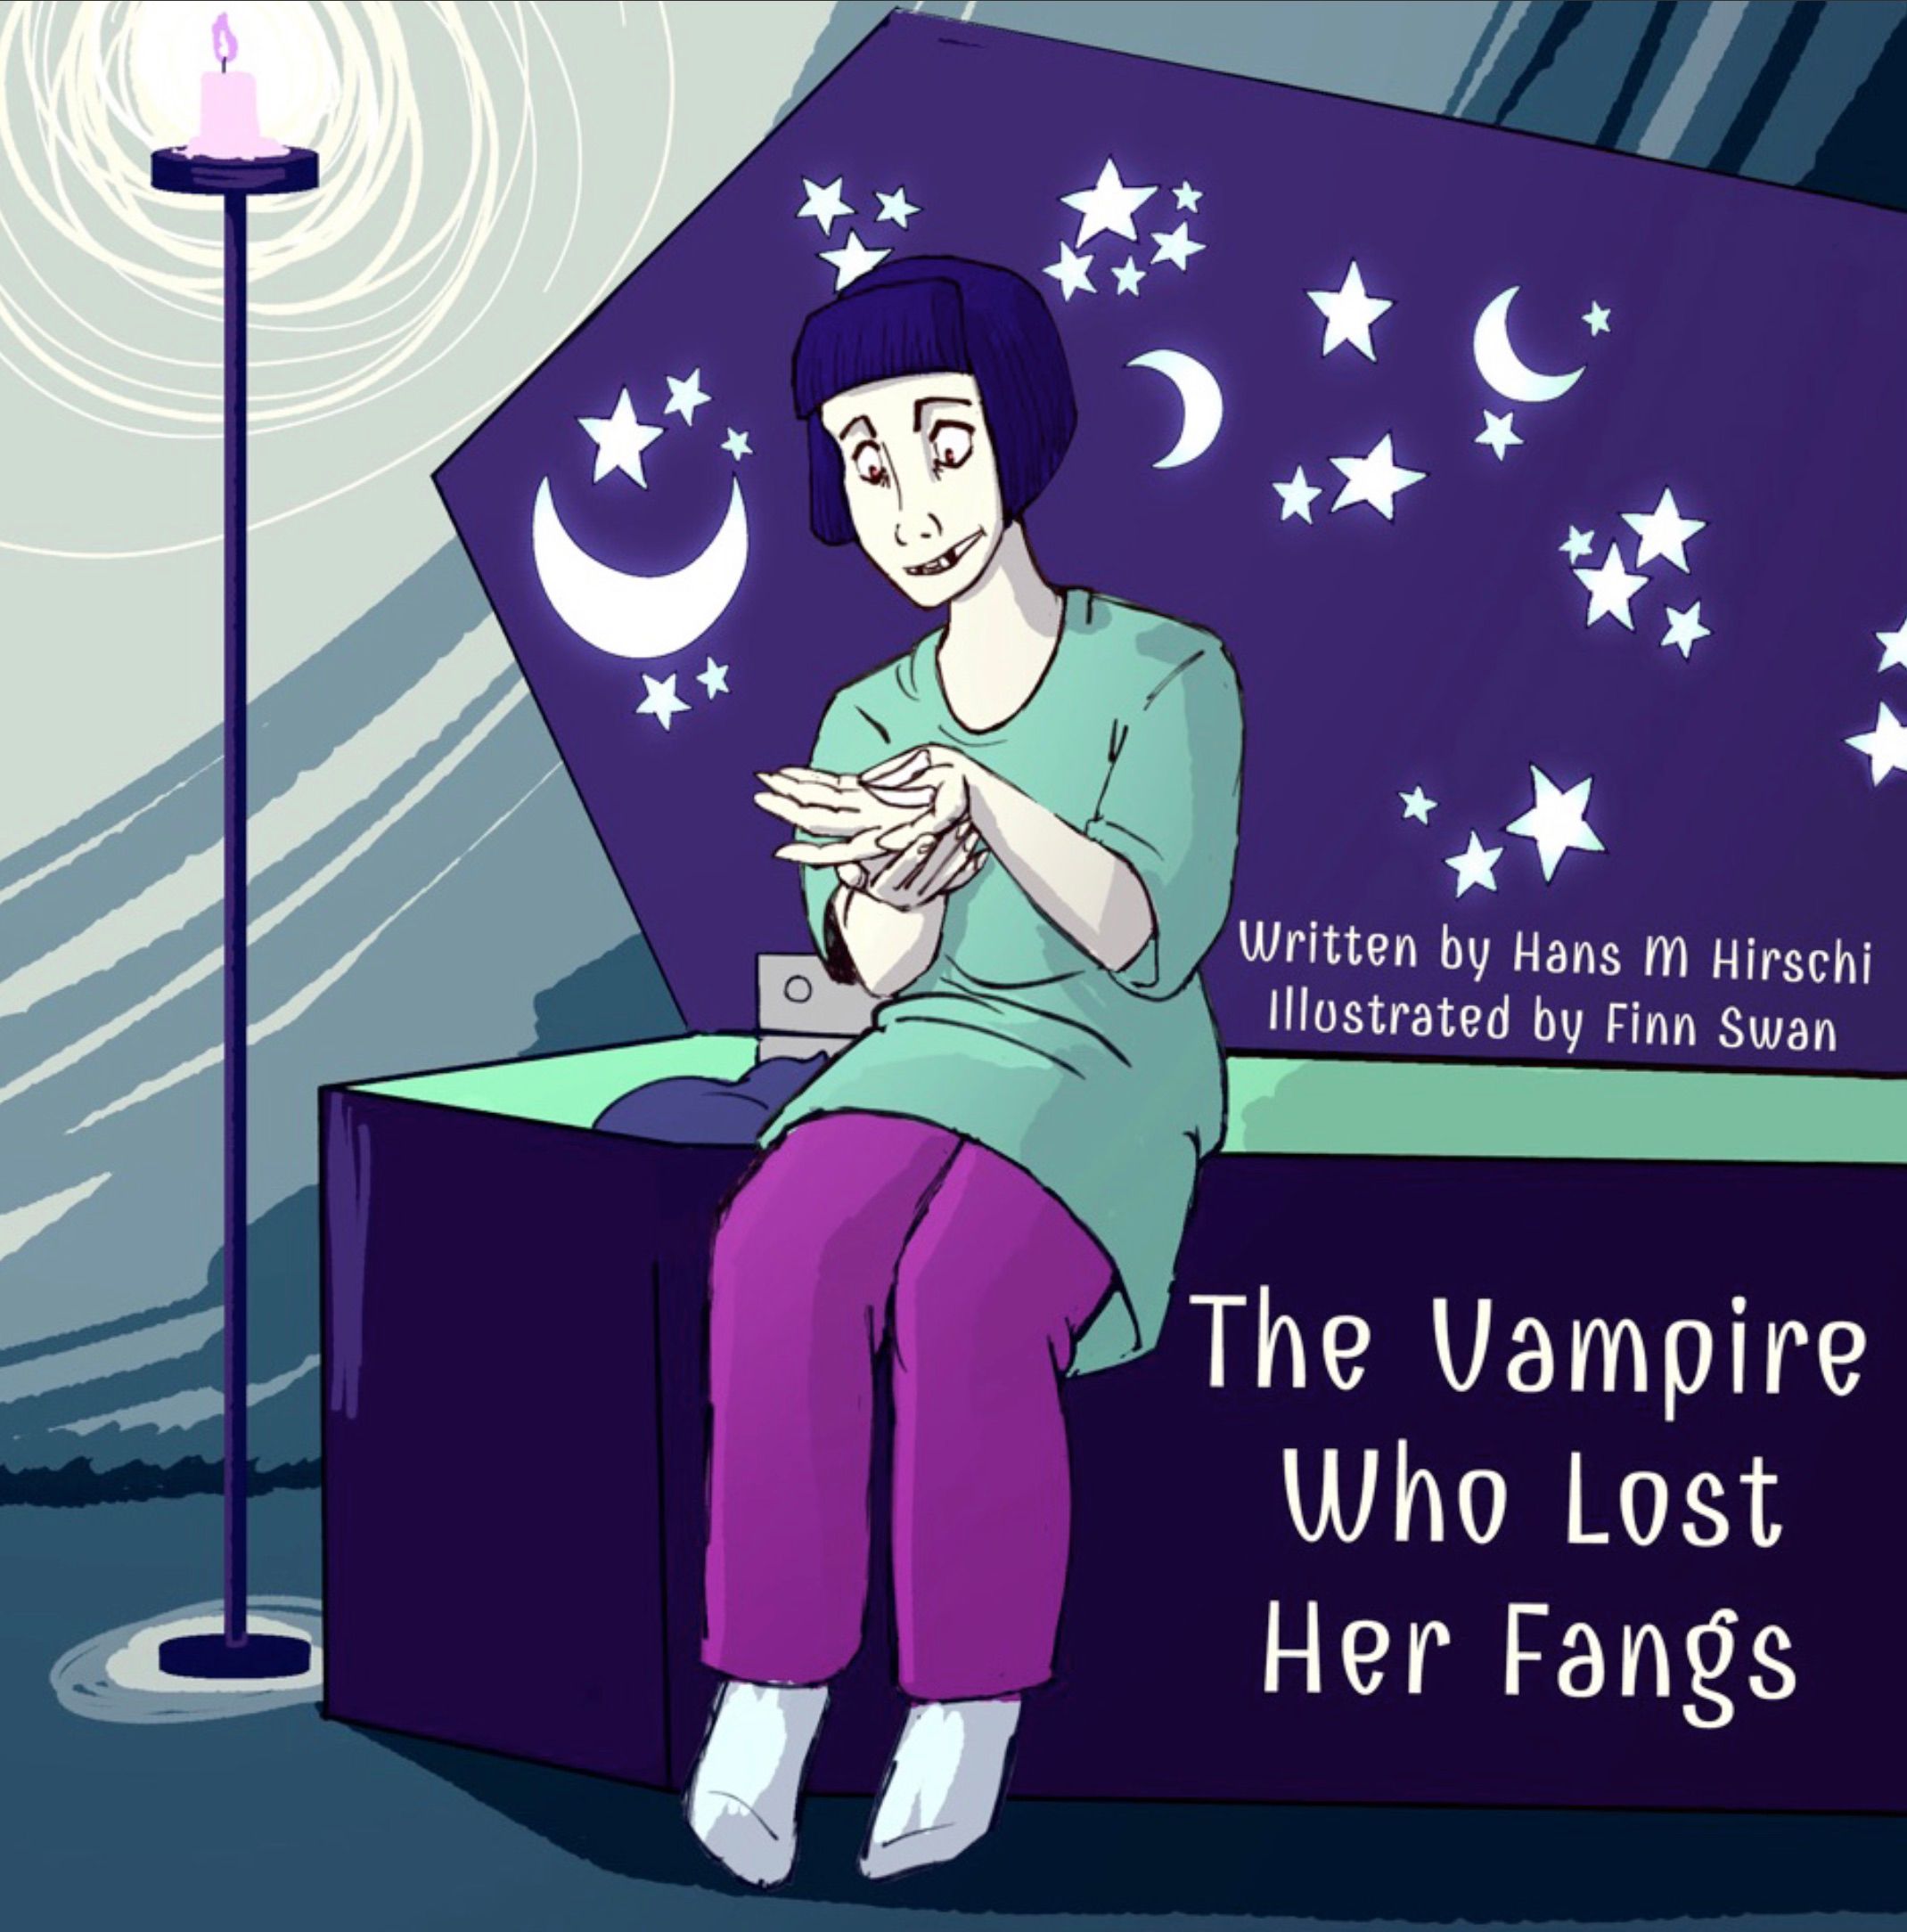 The Vampire Who Lost Her Fangs, eBook by Hans M Hirschi